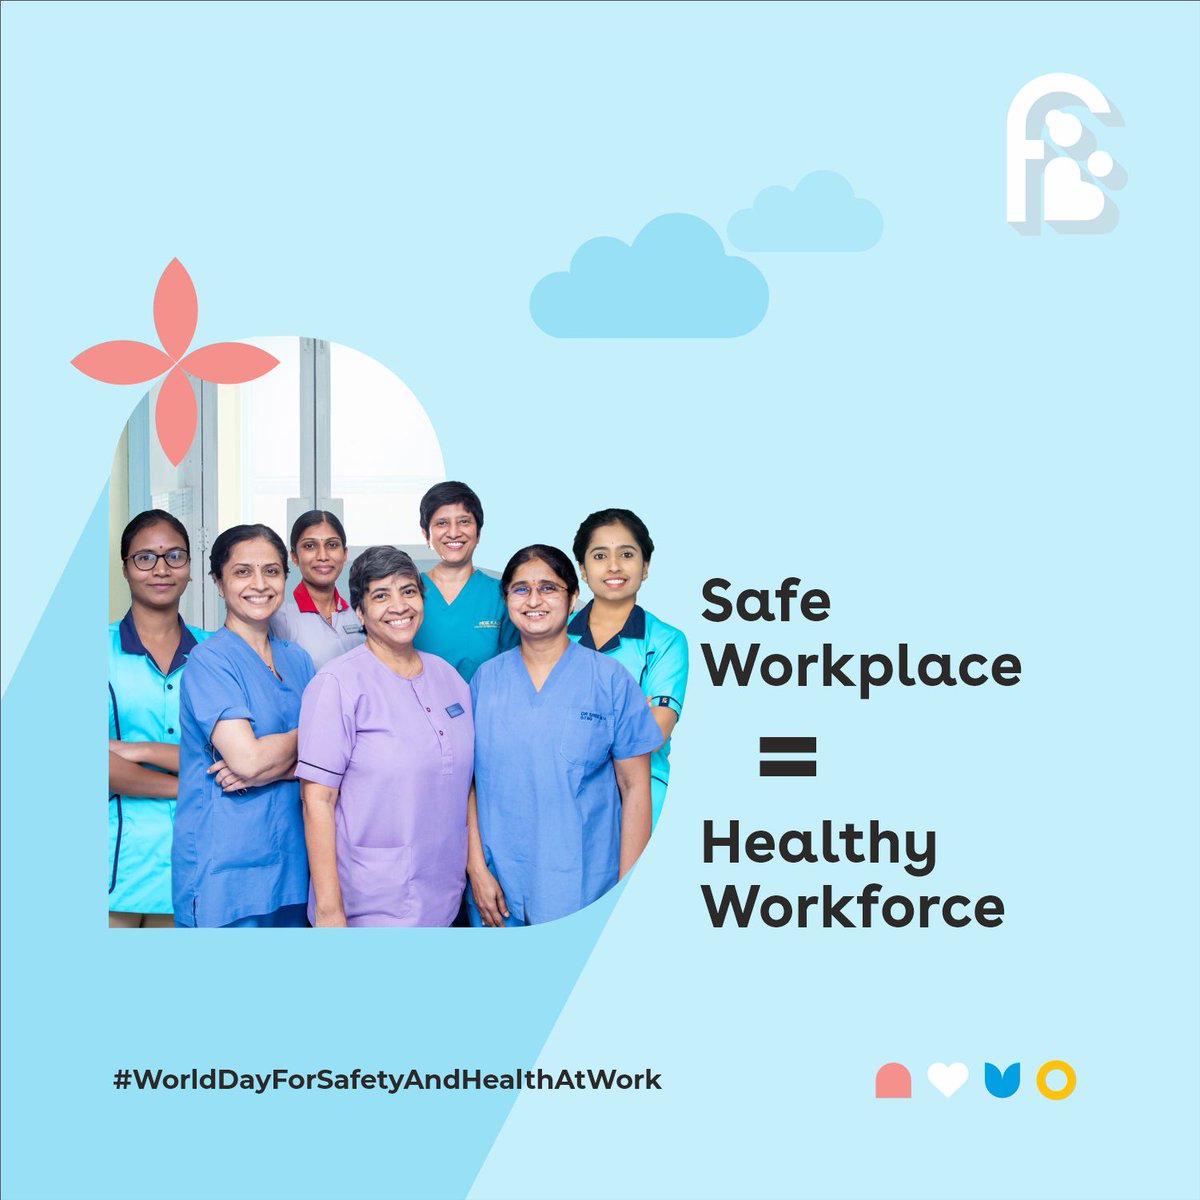 Embracing the ethos of safety and health, at Fernandez, we stand together on World Day for Safety and Health at Work.💖We reaffirm our commitment to fostering a workplace culture where every individual's well-being is prioritised

#FernandezHospital #MaternalHealth #SafeWorkplace